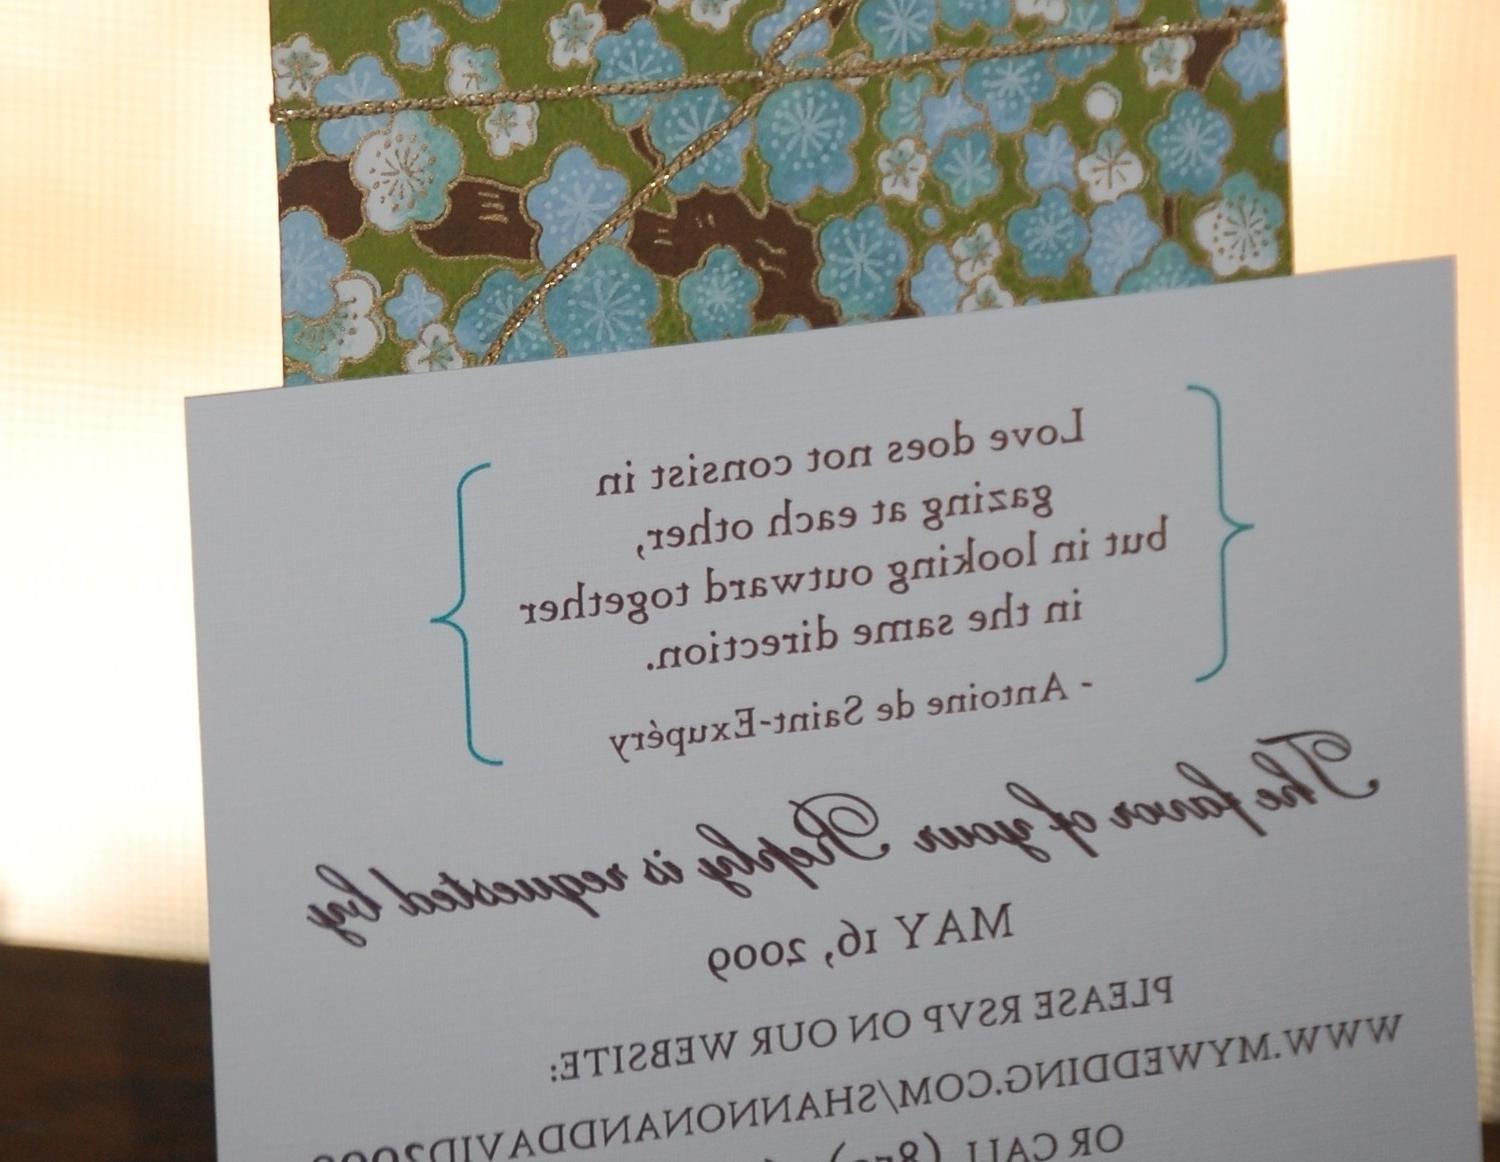 Chiyogami Wedding Invitation or Announcement - Blue Green Cherry Blossom